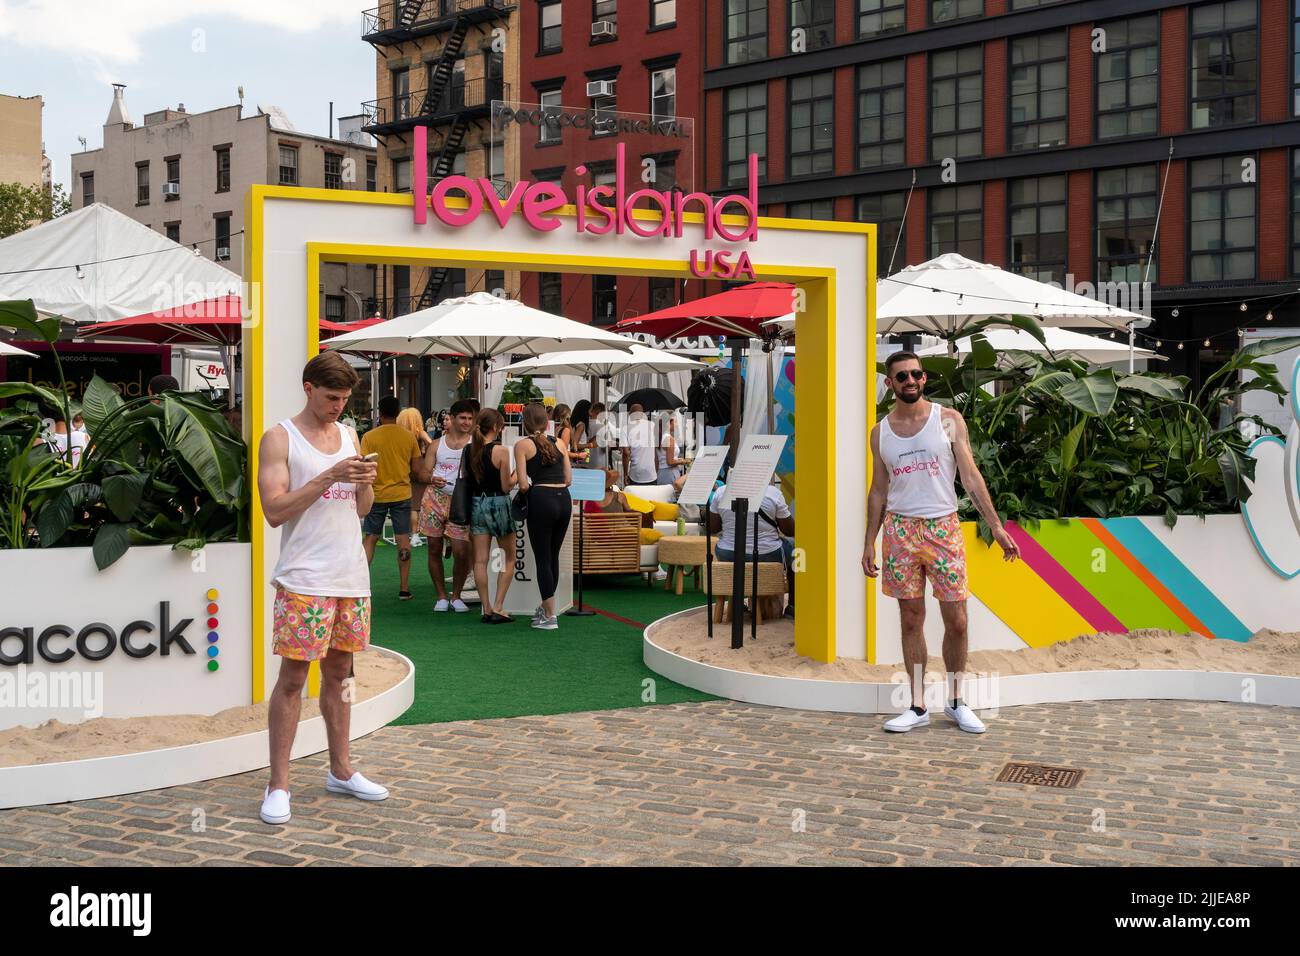 Visitors brave the excessive heat to flock to Peacock’s “Love Island: USA” brand activation in the Meatpacking District of New York on Wednesday, July, 20, 2022. Originally developed in the UK, the “reality” dating series is in its fourth season and premiered on the streaming network on July 19. (© Richard B. Levine) Stock Photo